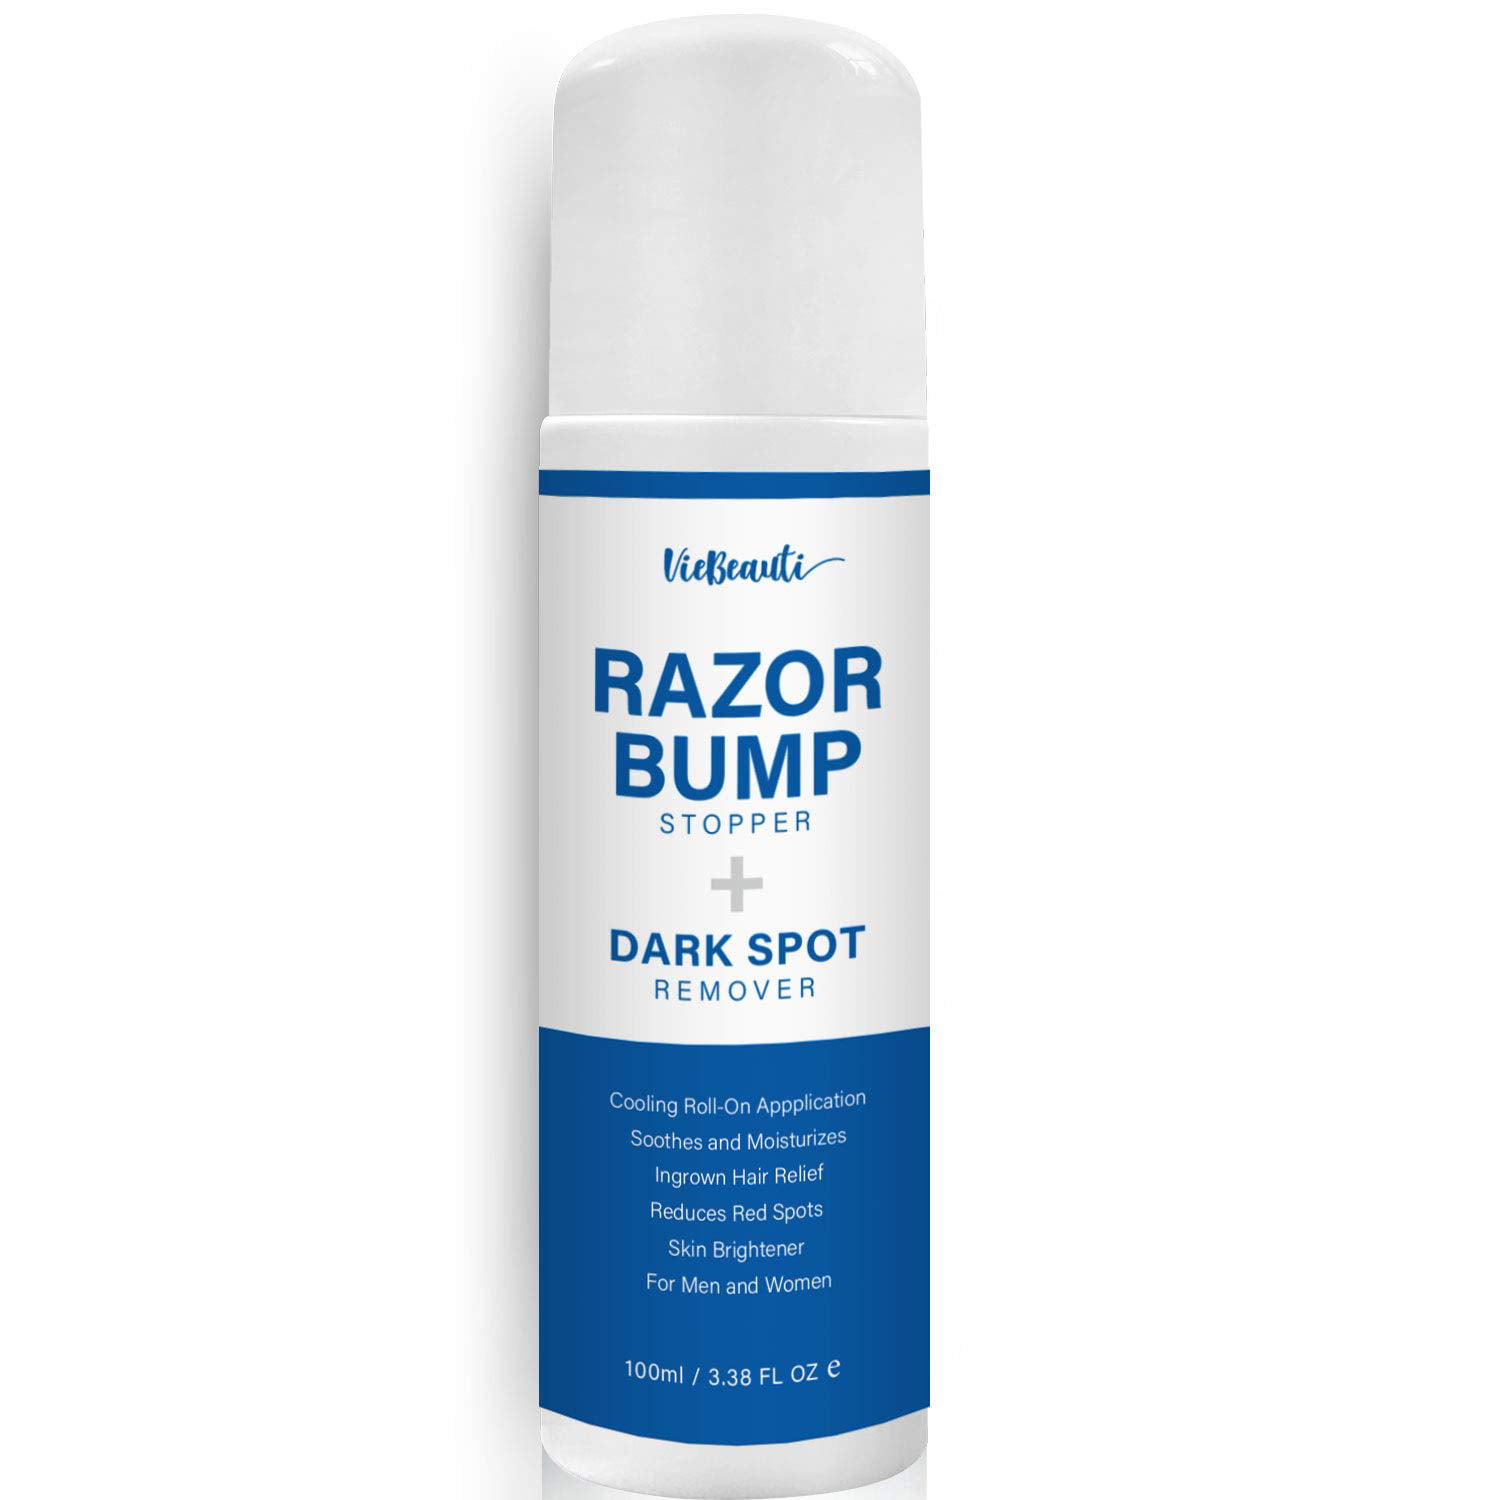 VieBeauti Razor Bump Stopper with Dark Spot Remover, After Shave Solution f...